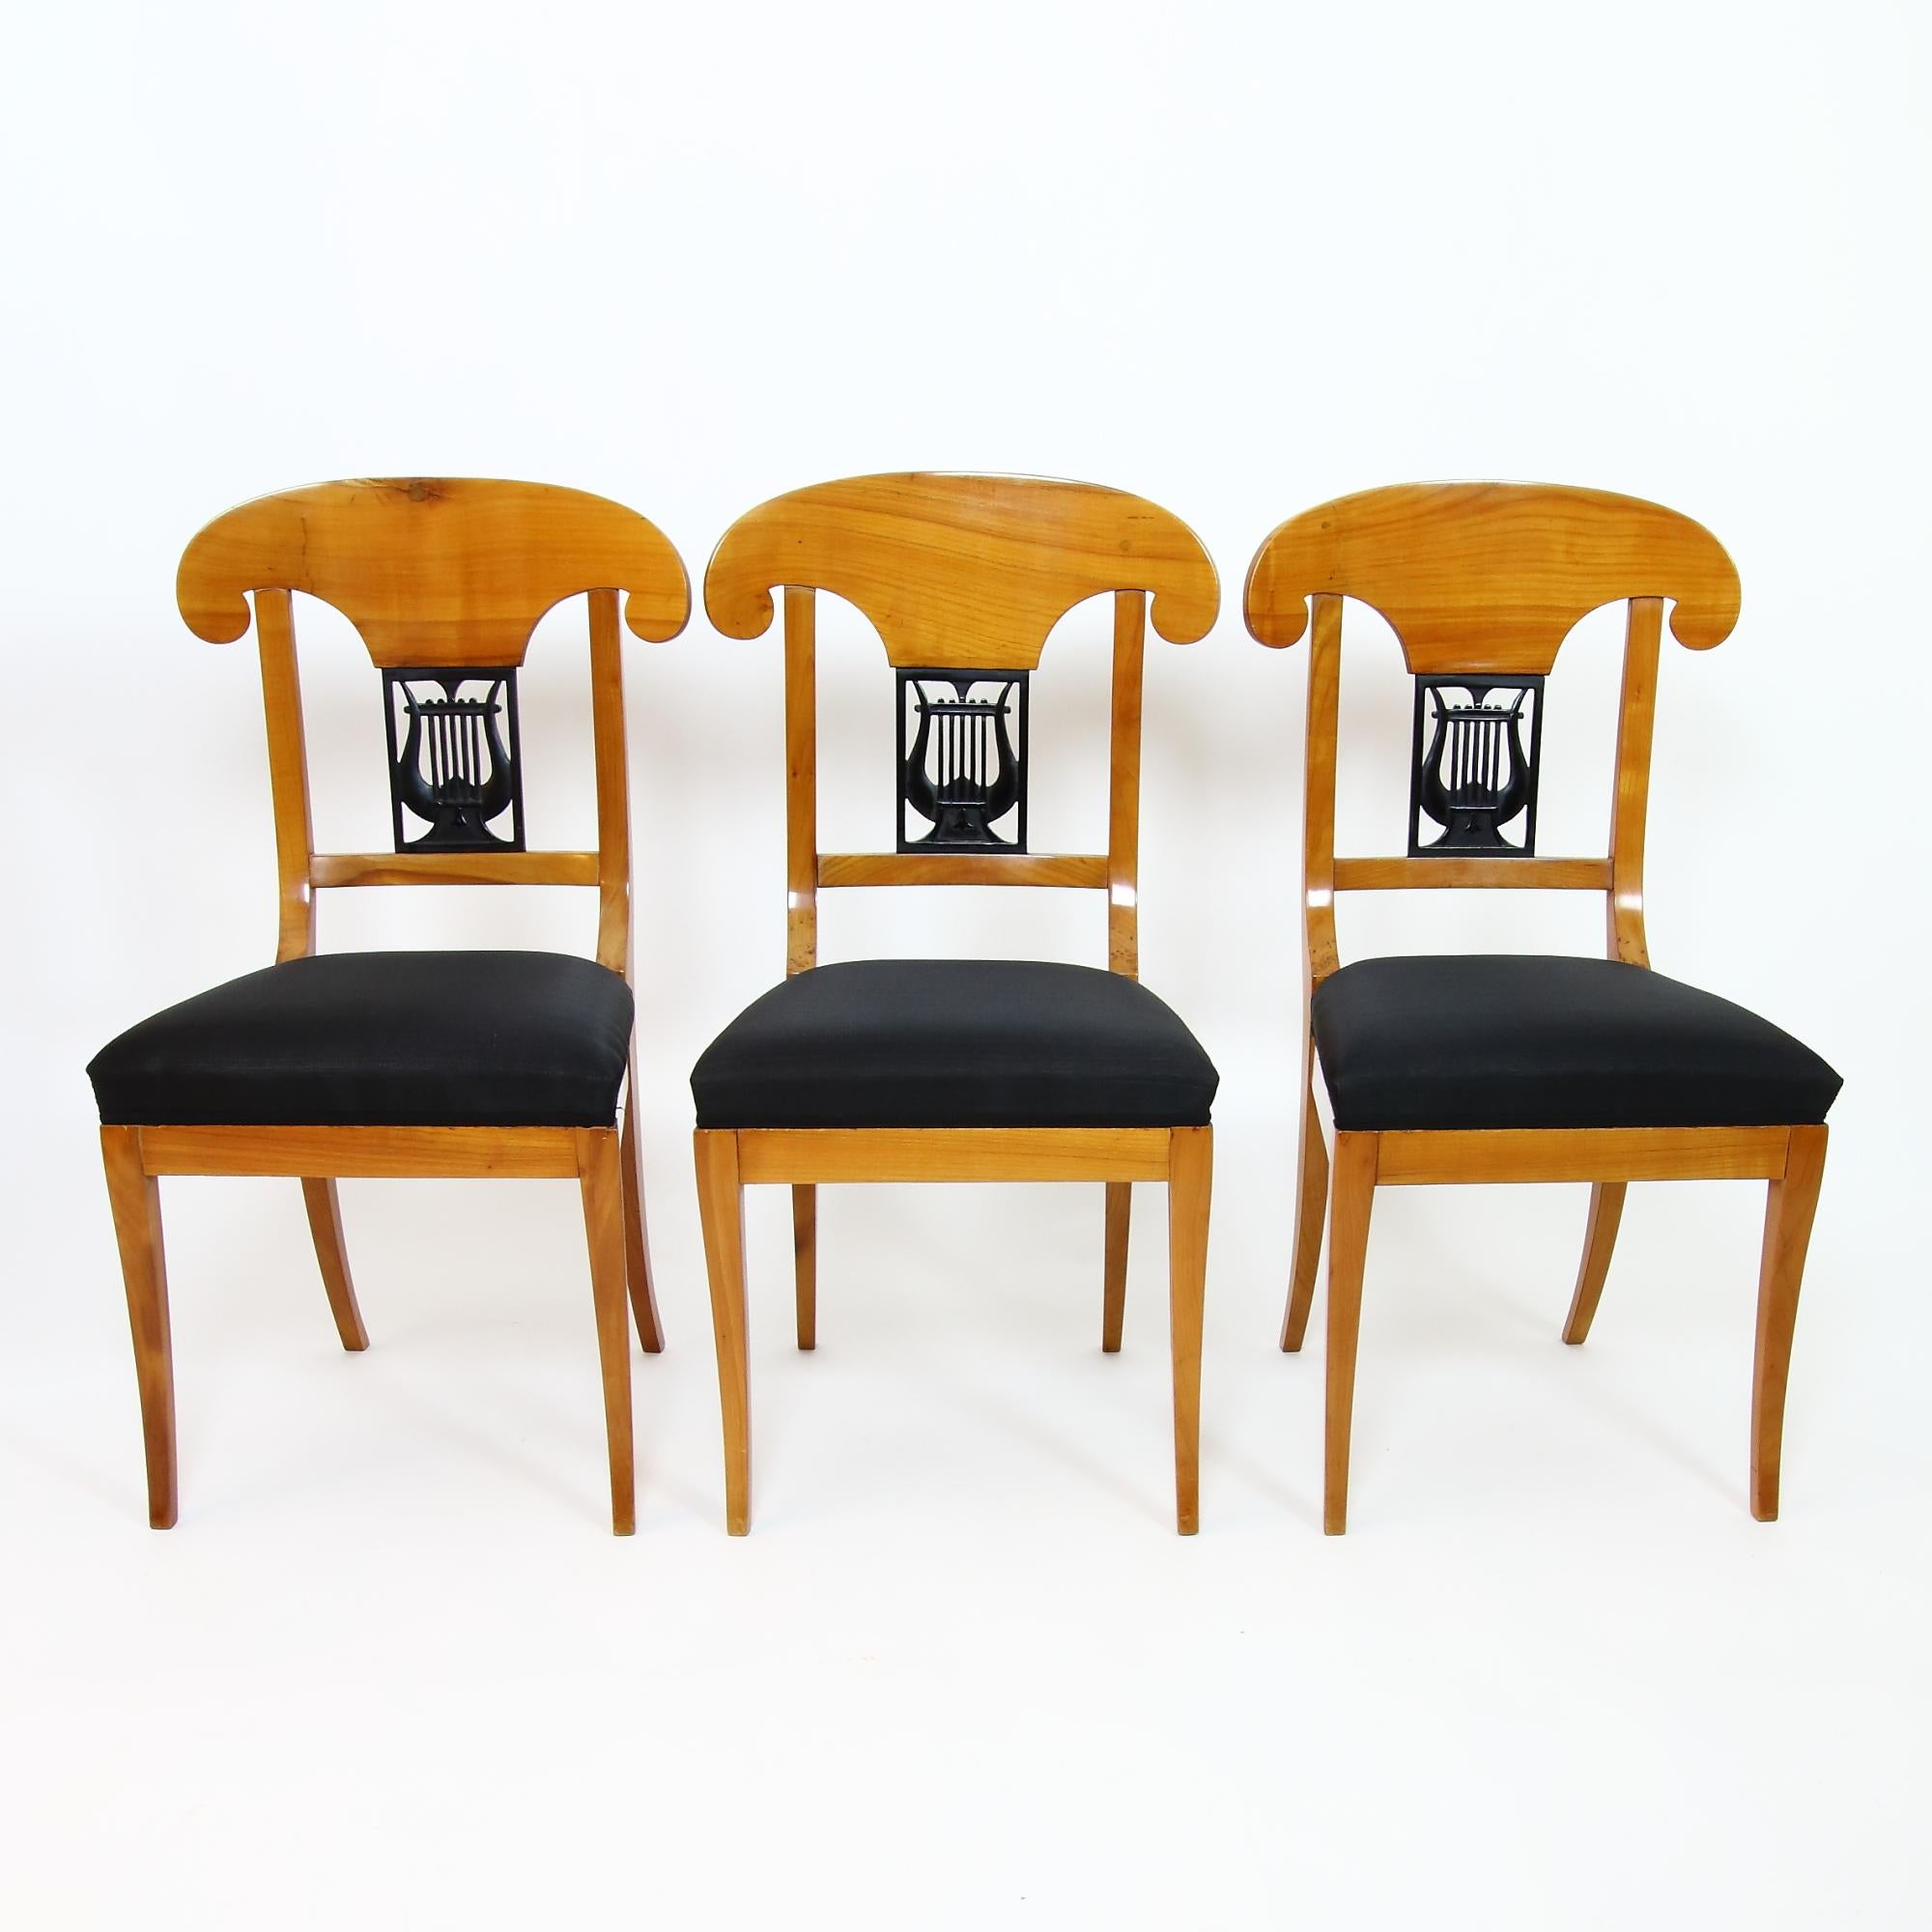 Set of 8 partially Early 19th German Biedermeier Saxe-Coburg provenance chairs: 3 chairs with inventory stamp of Ehrenburg Palace in Coburg (soth Germany)/House of Saxe-Coburg and Gotha, 5 chairs hand-crafted after their model in the late 20th